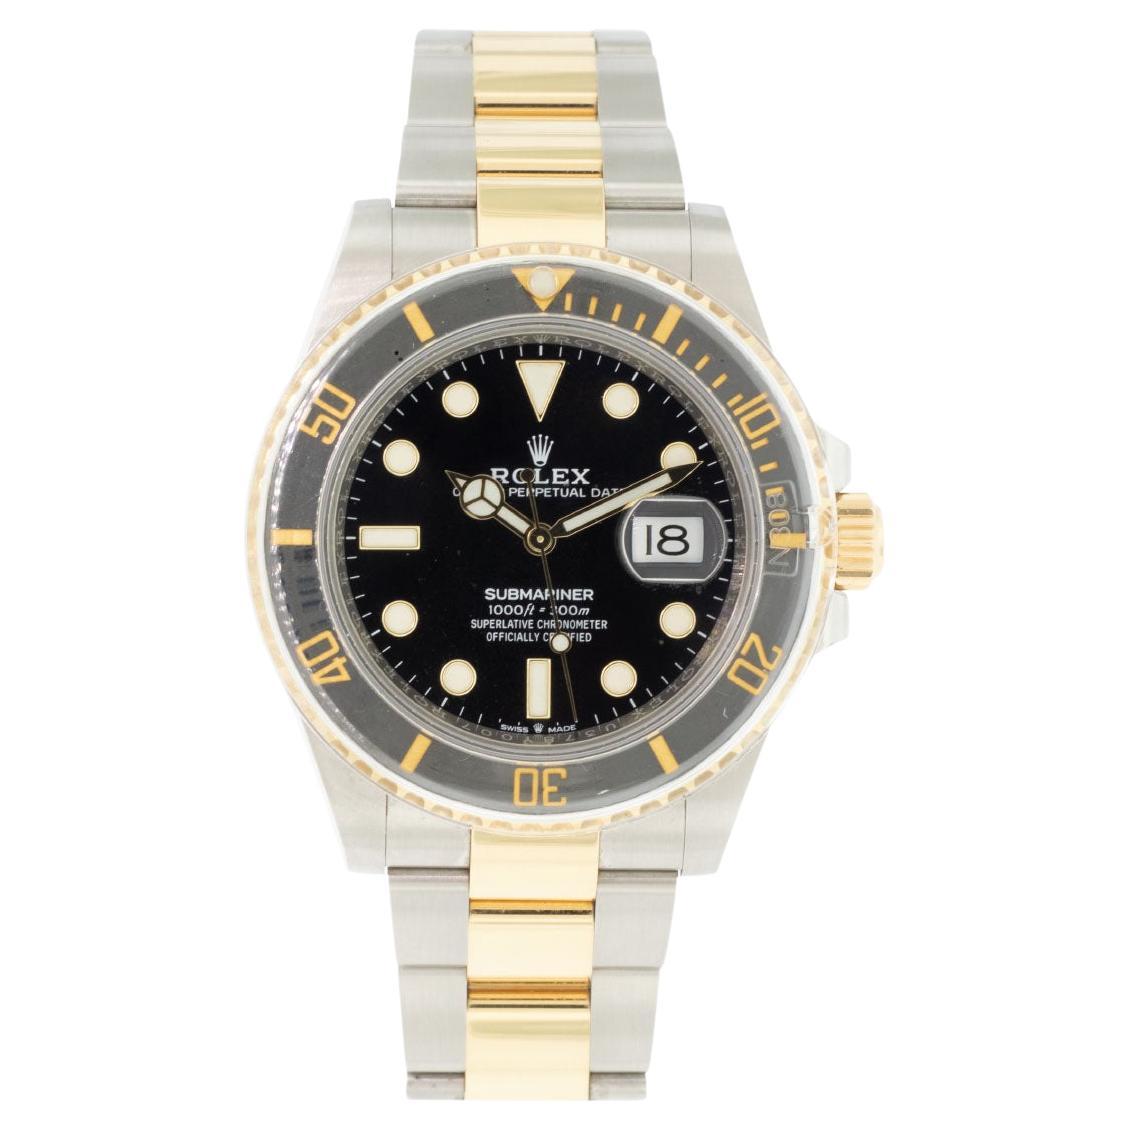 Rolex 126613LN Submariner Two Tone Black Dial Watch For Sale